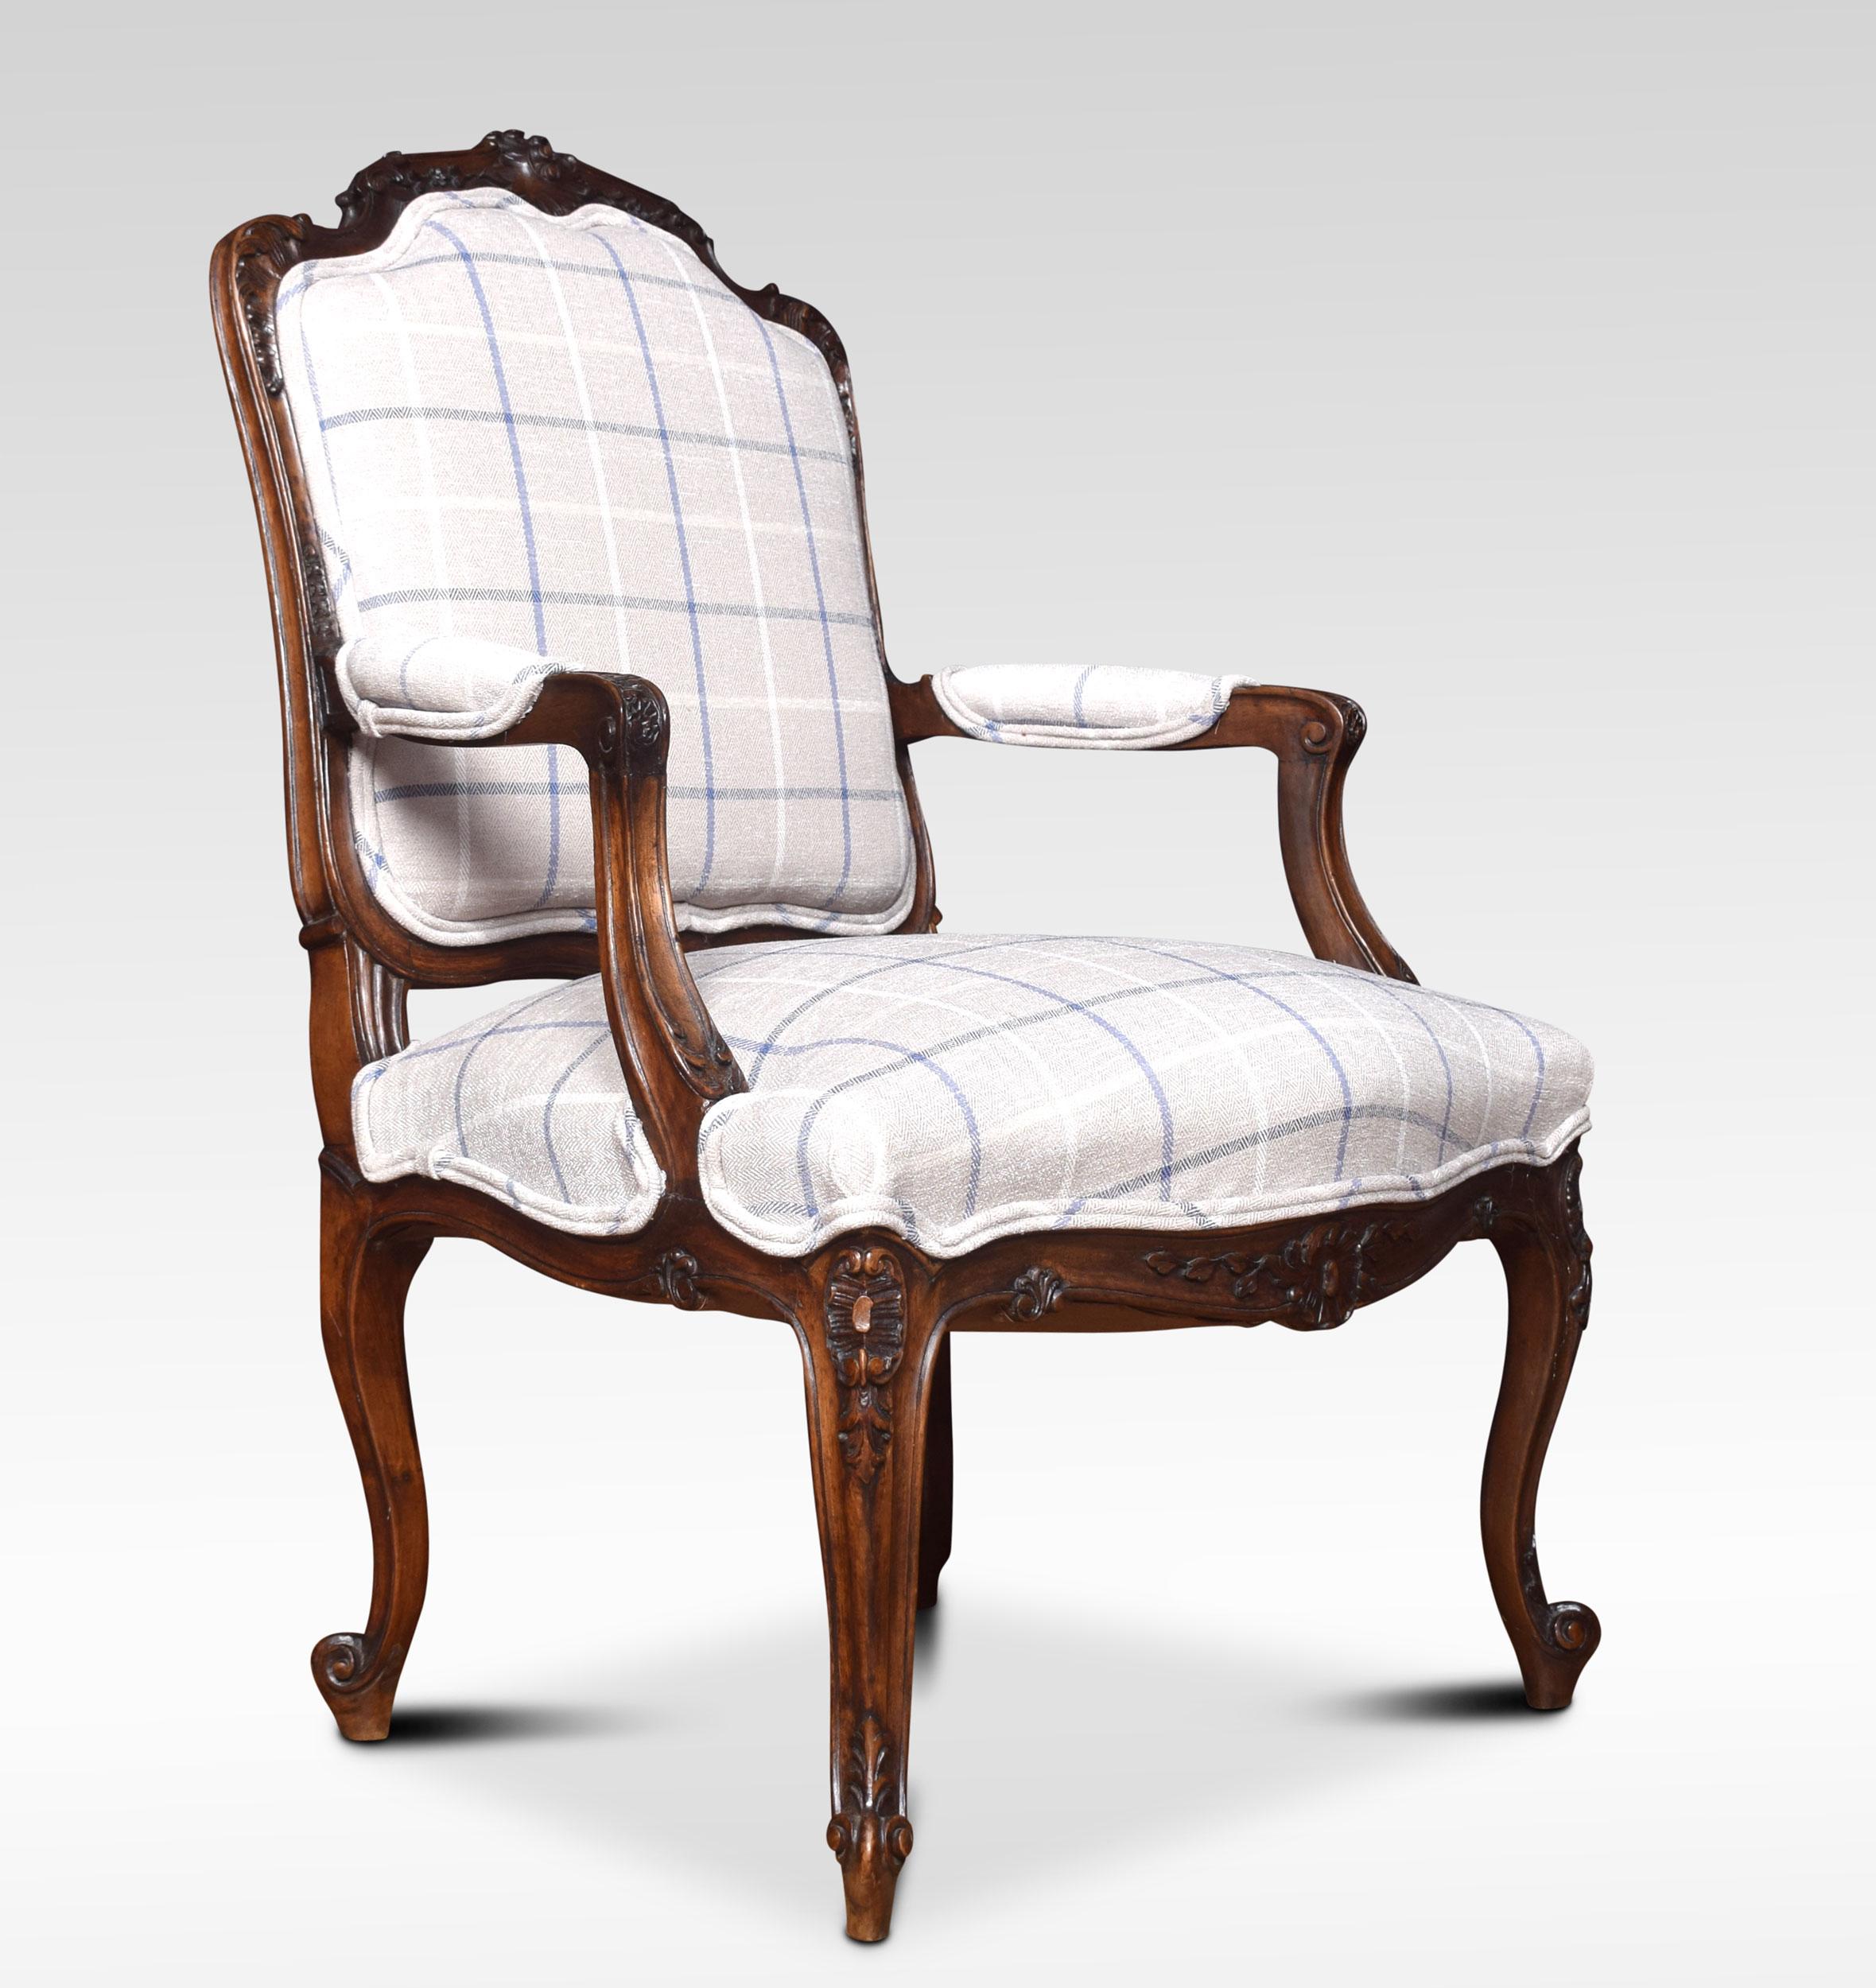 Pair of walnut Fauteuil, each with arched and padded back joined by moulded acanthine-carved arms to the padded seat. Above a carved apron all raised up on cabriole legs terminating in foliated toes.
Dimensions:
Height 39.5 inches height to seat